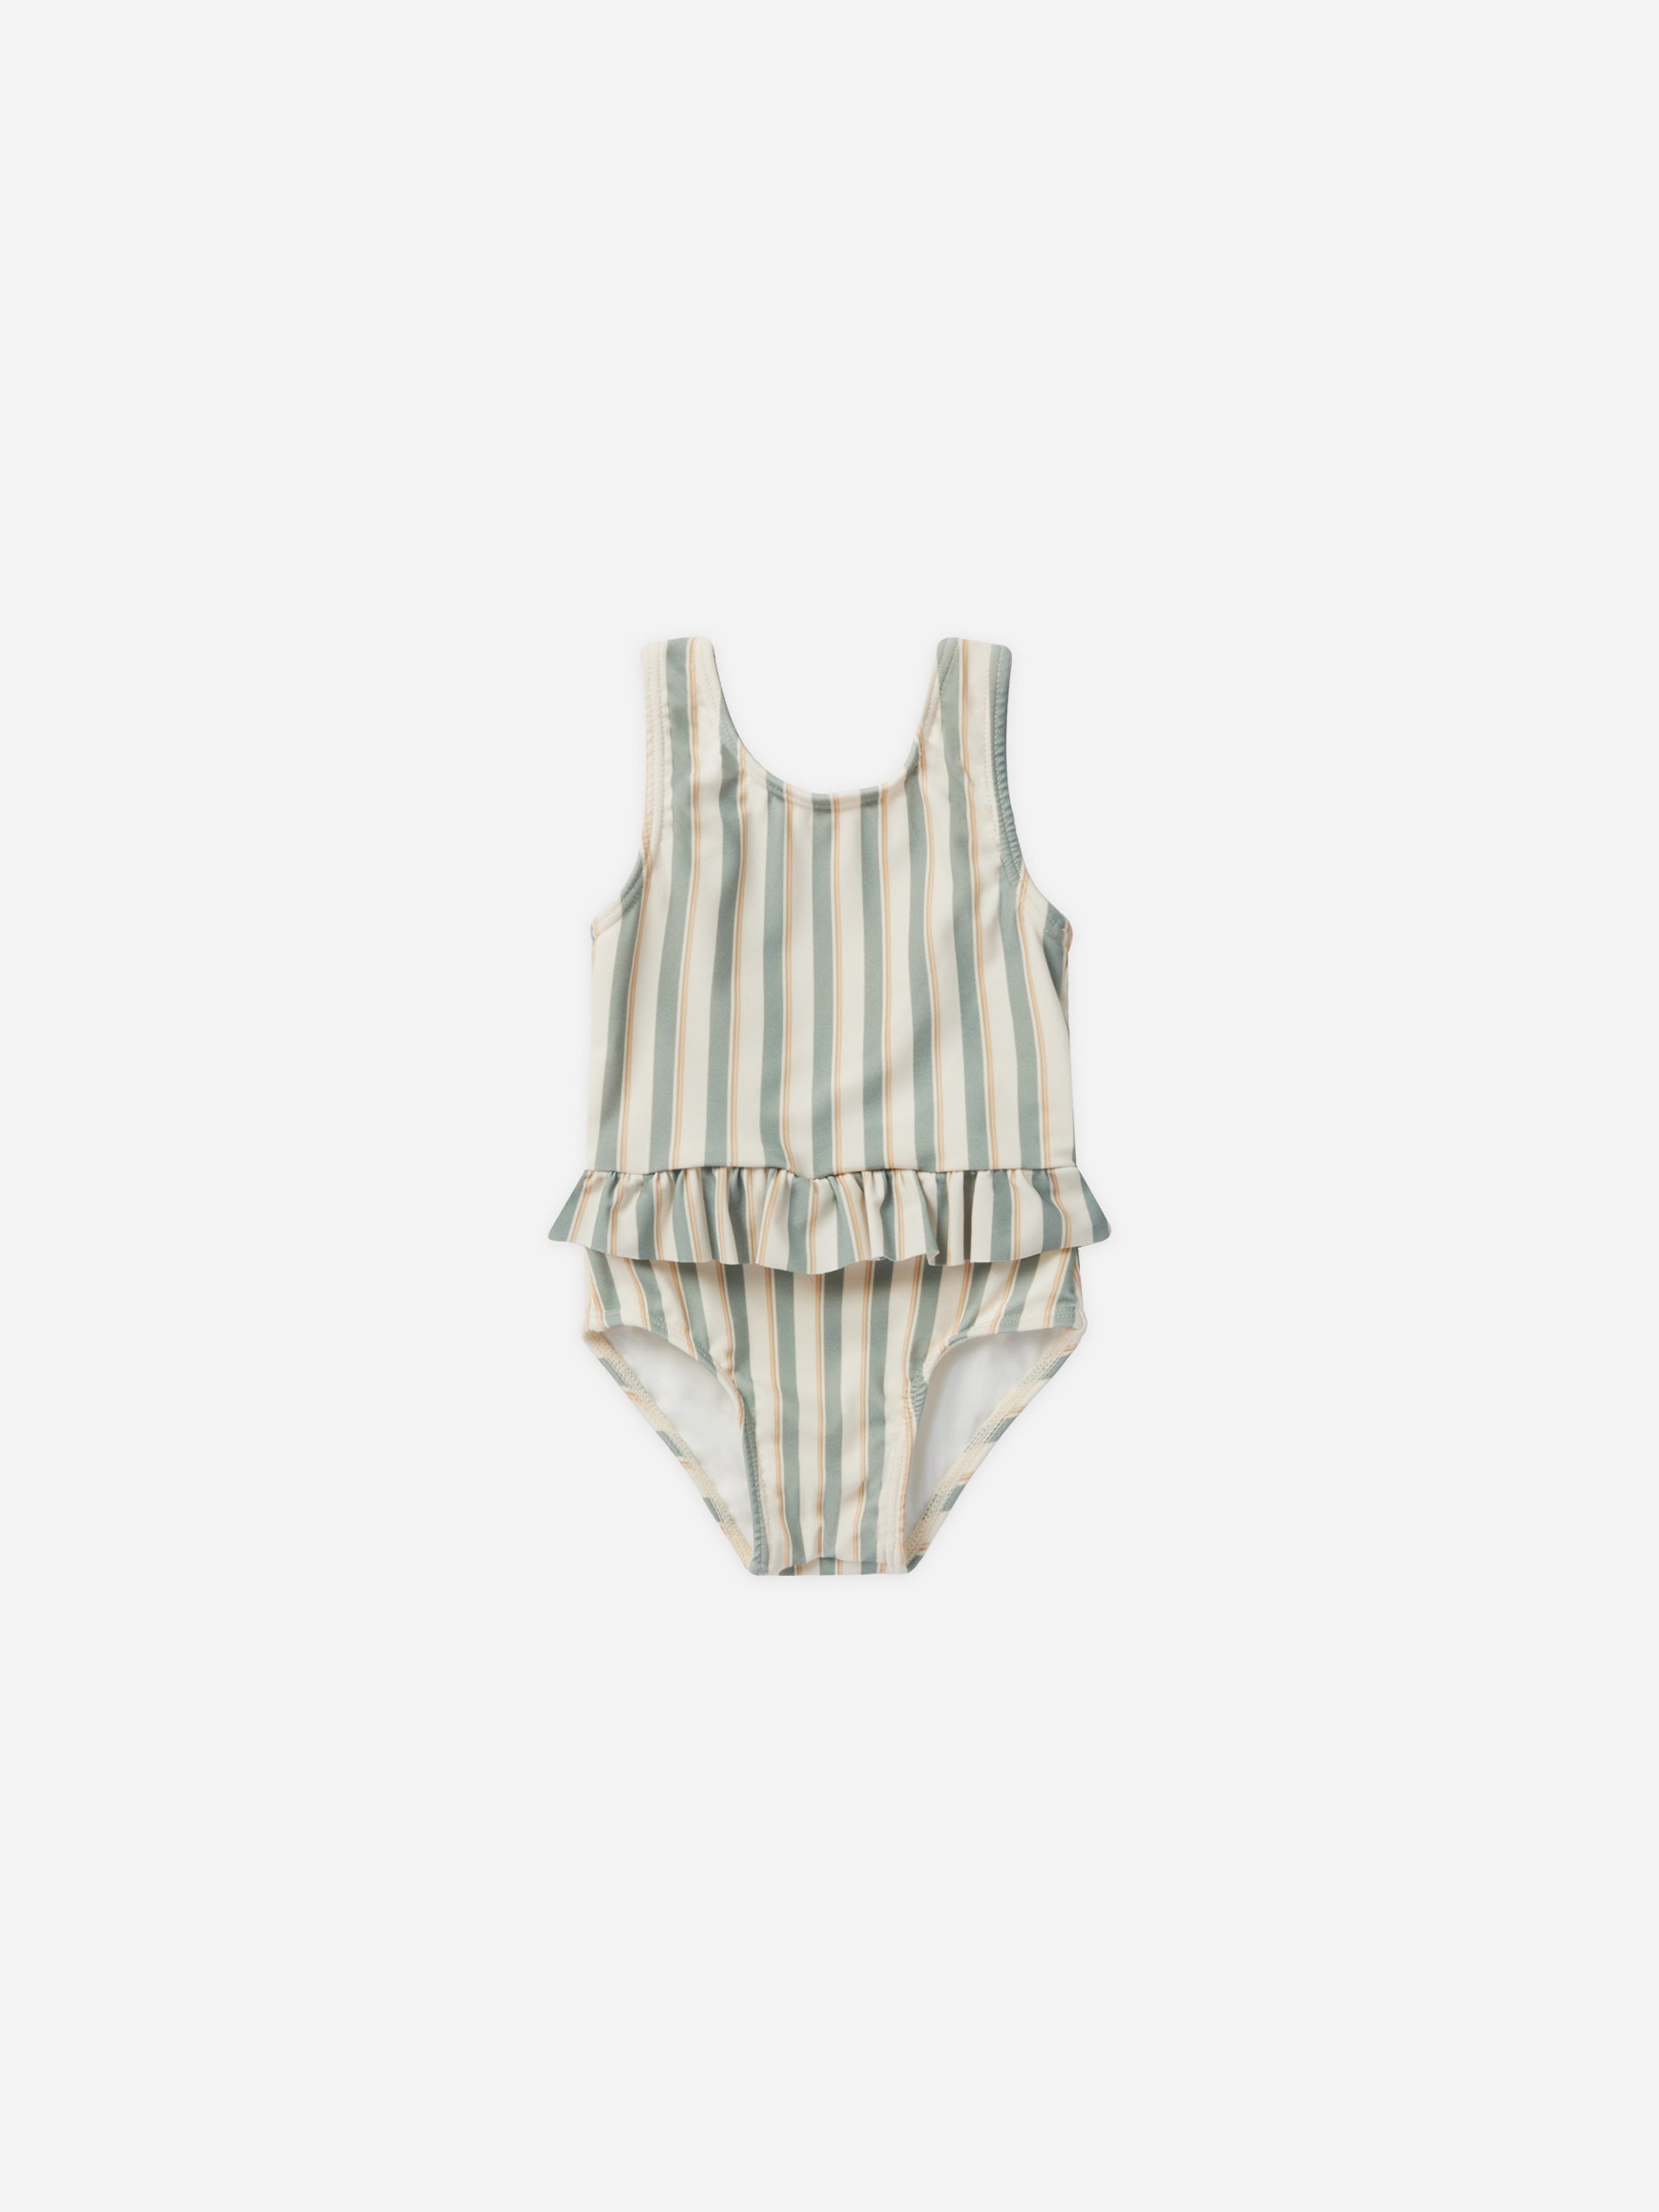 Skirted One-Piece || Aqua Stripe - Rylee + Cru | Kids Clothes | Trendy Baby Clothes | Modern Infant Outfits |